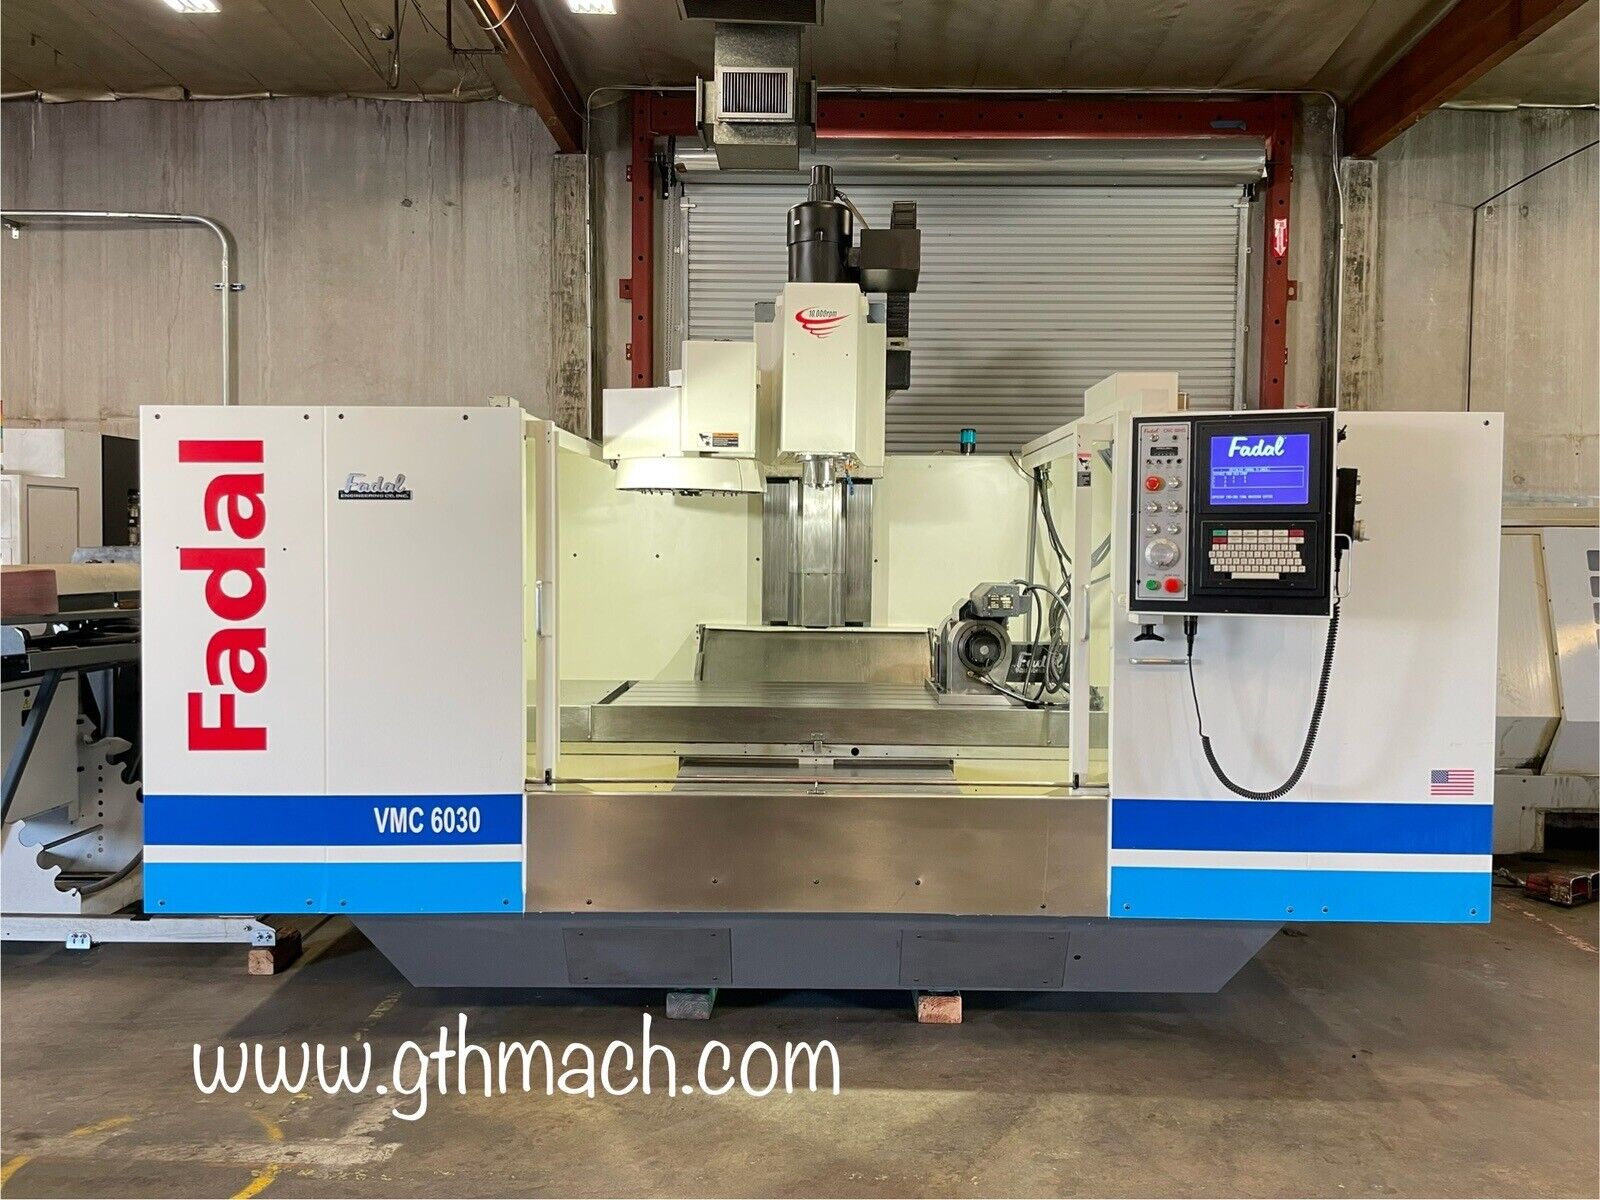 Fadal VMC 6030 CNC Machining Center With 5th Axis and Rigid Tap 10,000 RPM